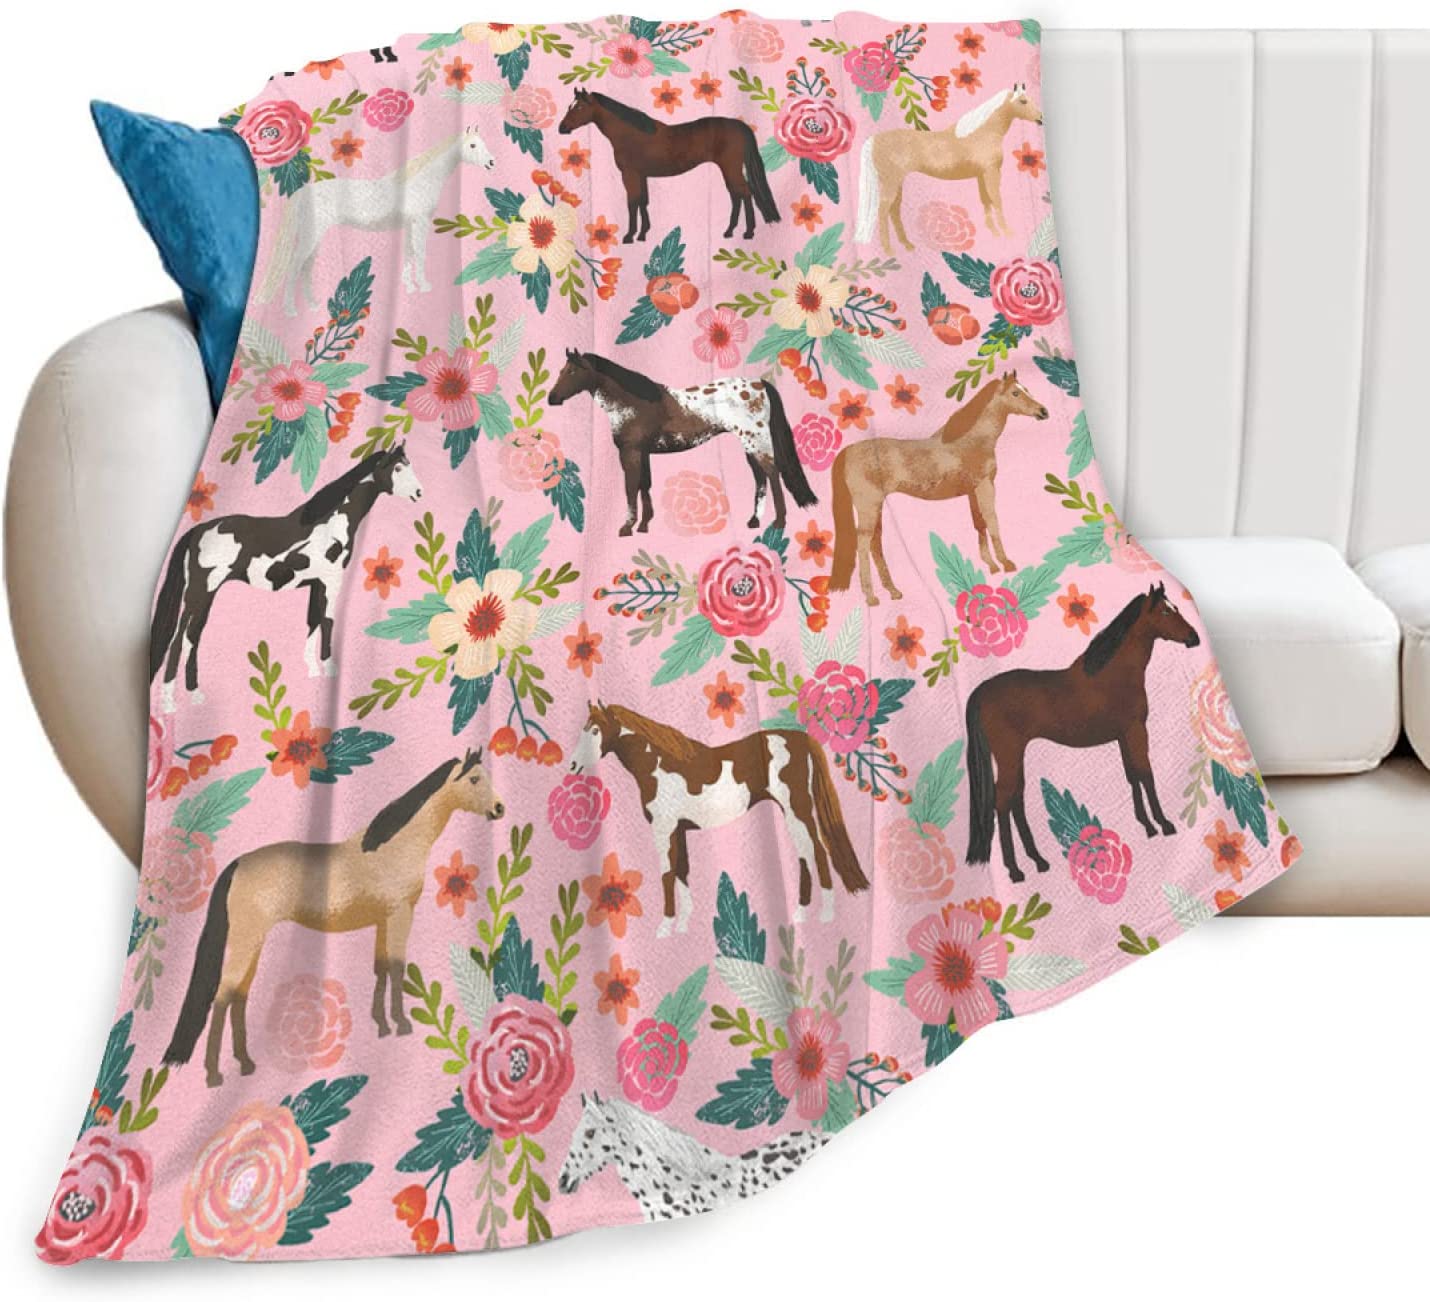 Horse Blanket Gift for Girls Women Cute Animal Horses Flowers Fleece Flannel Throw Blankets Soft Lightweight Plush Pink Blanket for Horse Lovers Decor Bed Sofa Featured Image